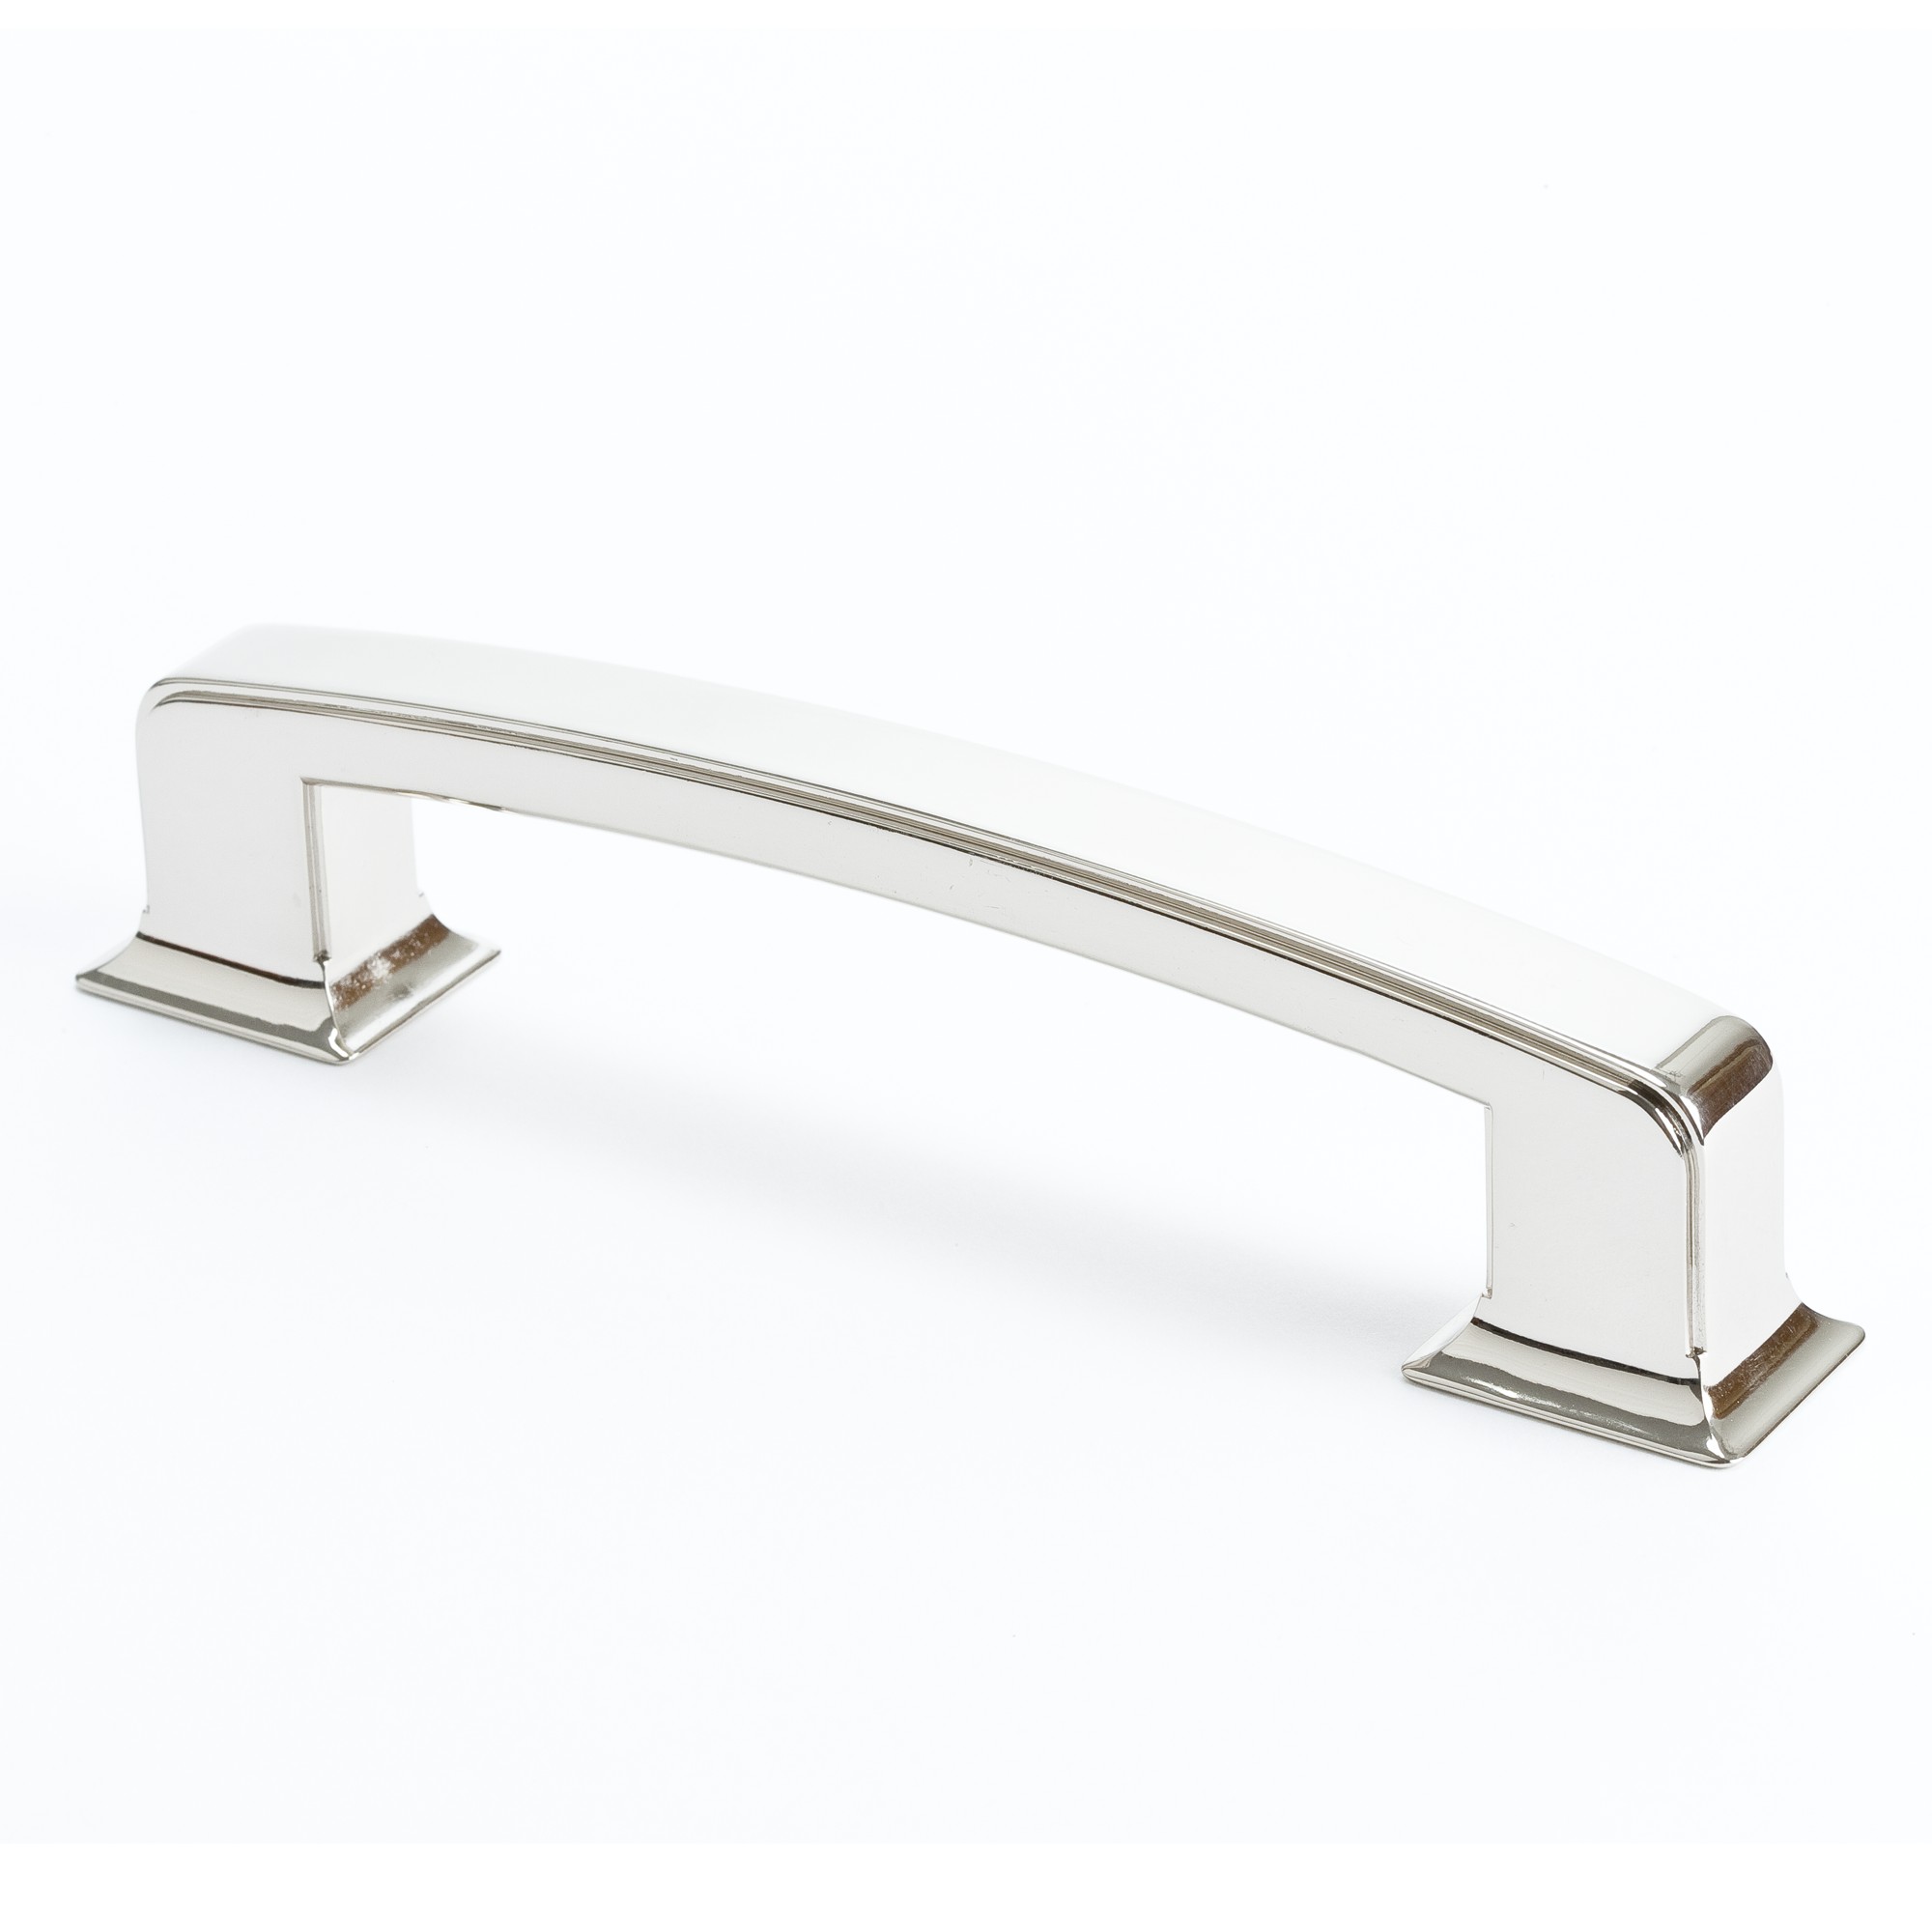 Designers Group 10 7-3/8" Appliance Pull in Polished Nickel